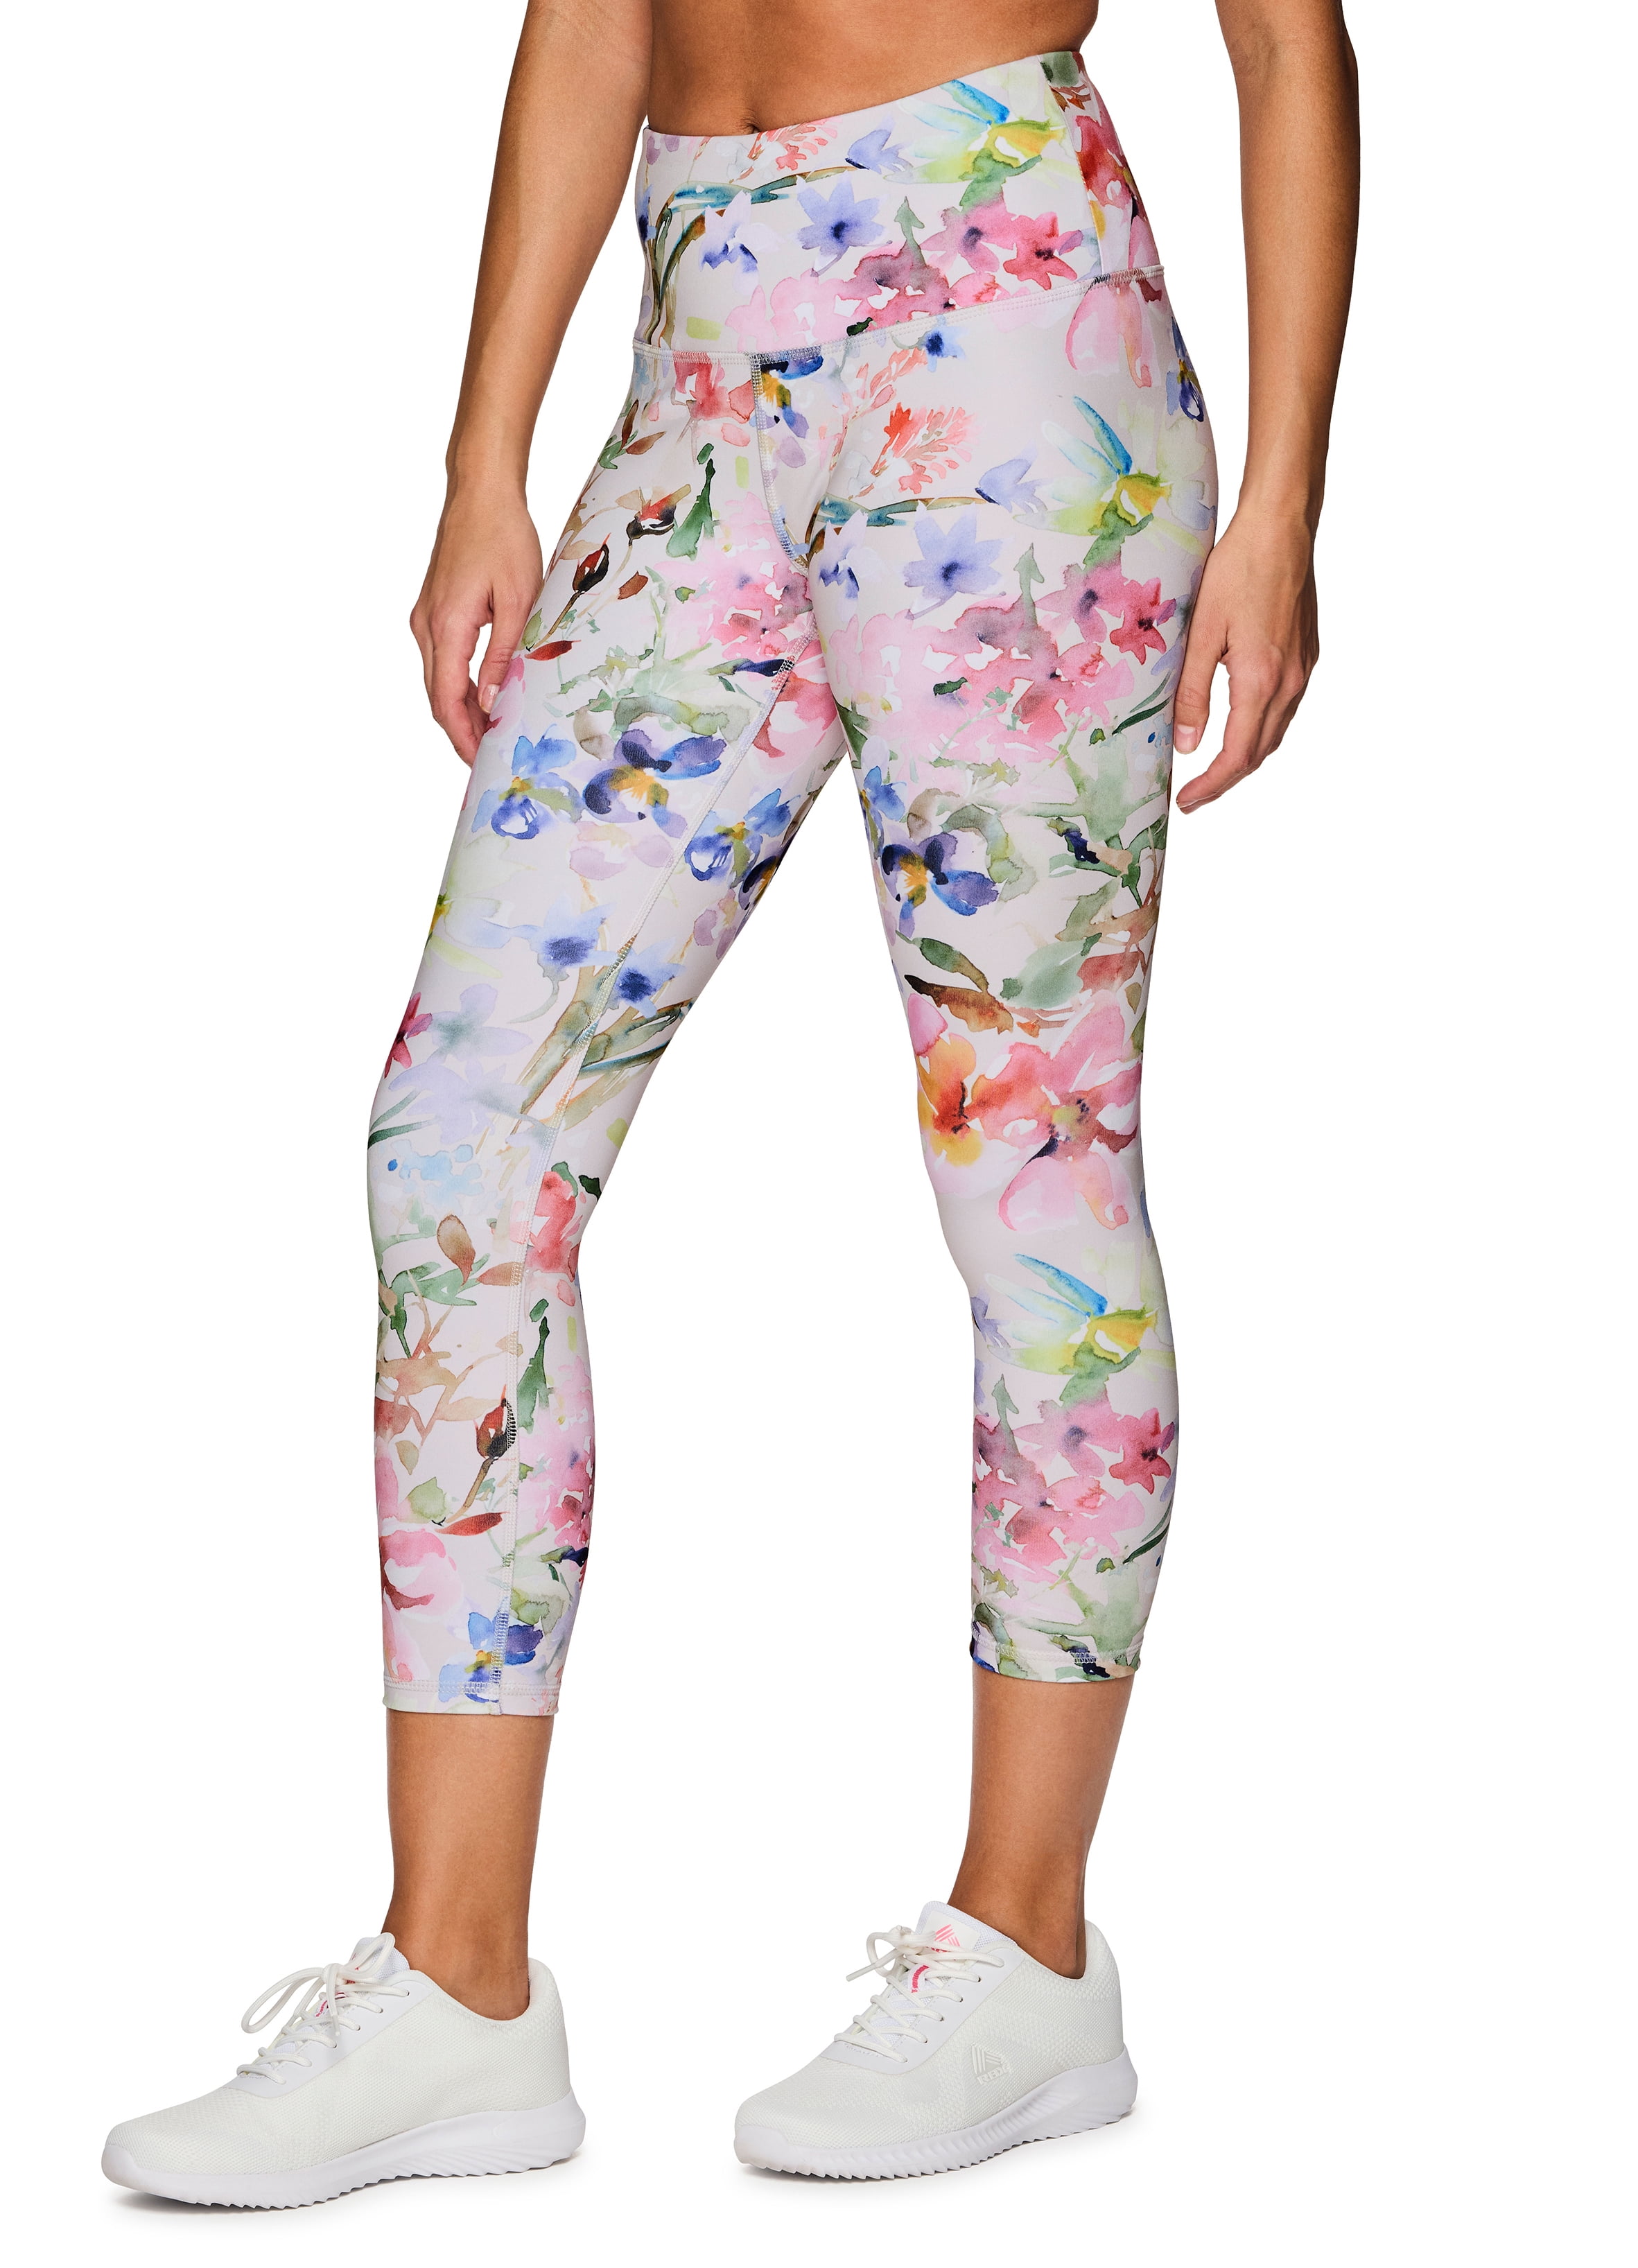  RBX Printed Capri Legging for Women Buttery Soft Floral Cropped  Yoga Tights with Pockets Flower Bed Multi XS : Clothing, Shoes & Jewelry